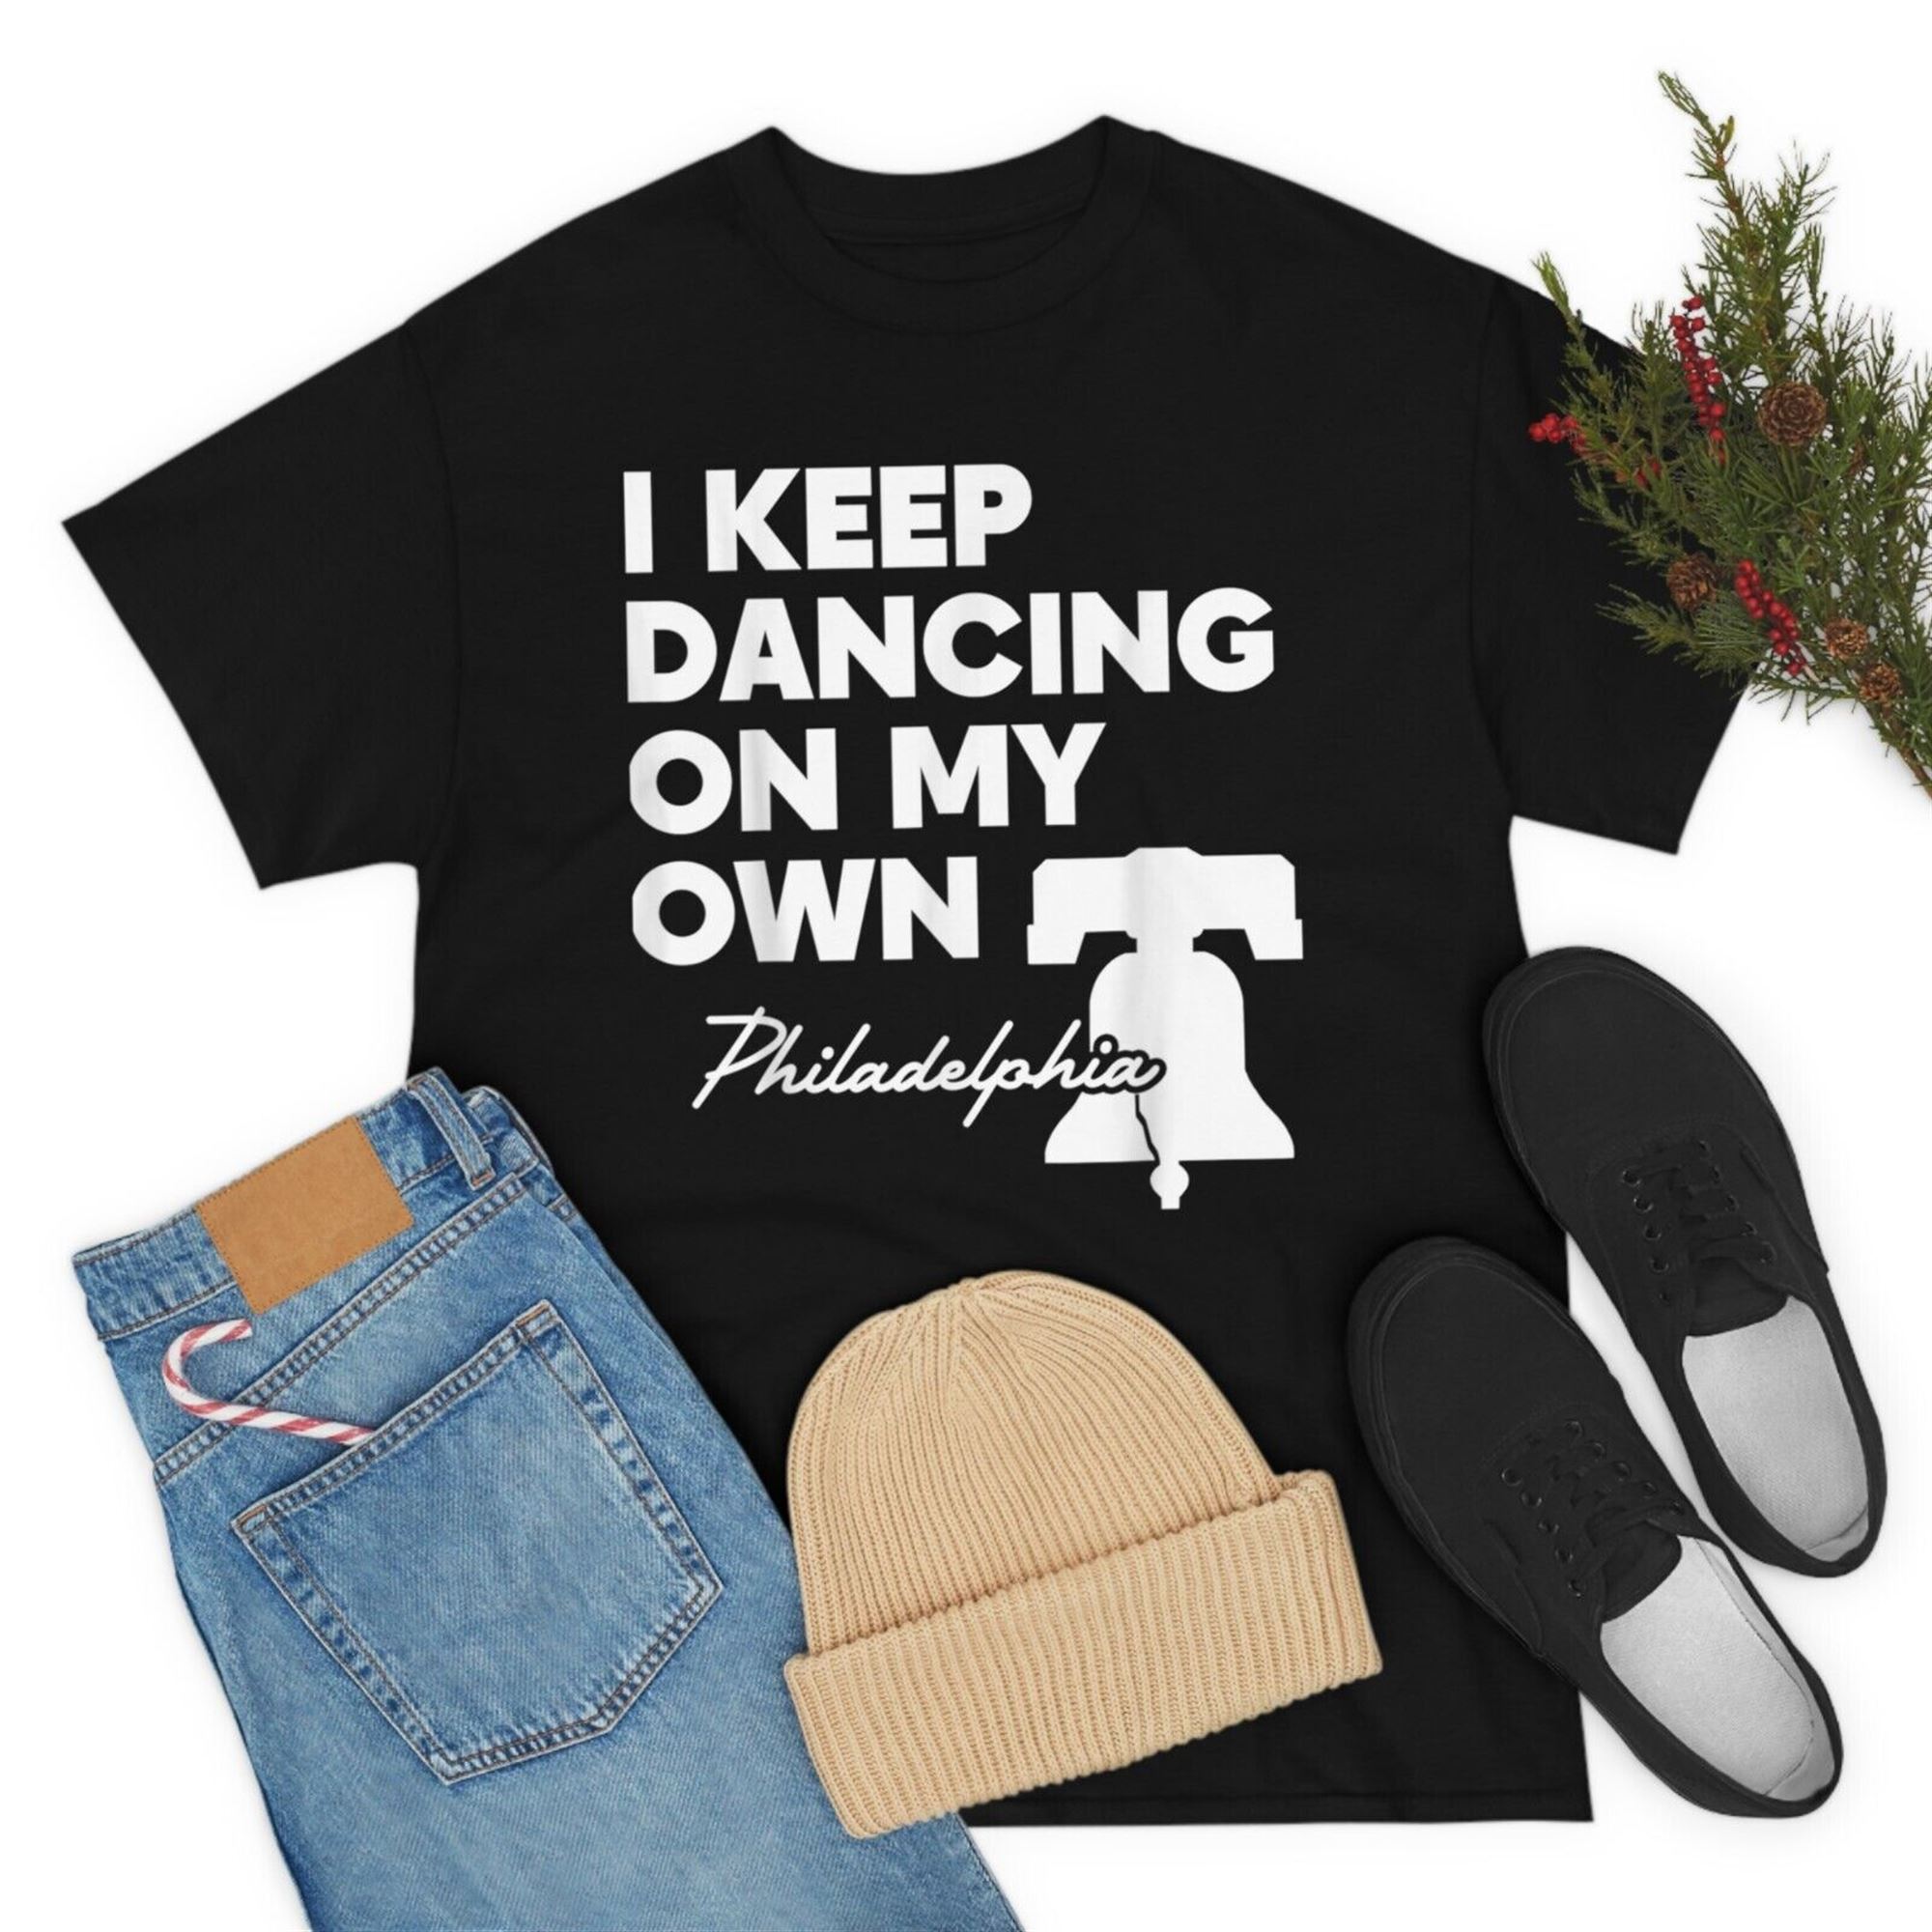 I Keep Dancing On My Own Philidelphia Philly Anthem T-shirt T-shirt Size S-5xl Plus Size Up To 5xl